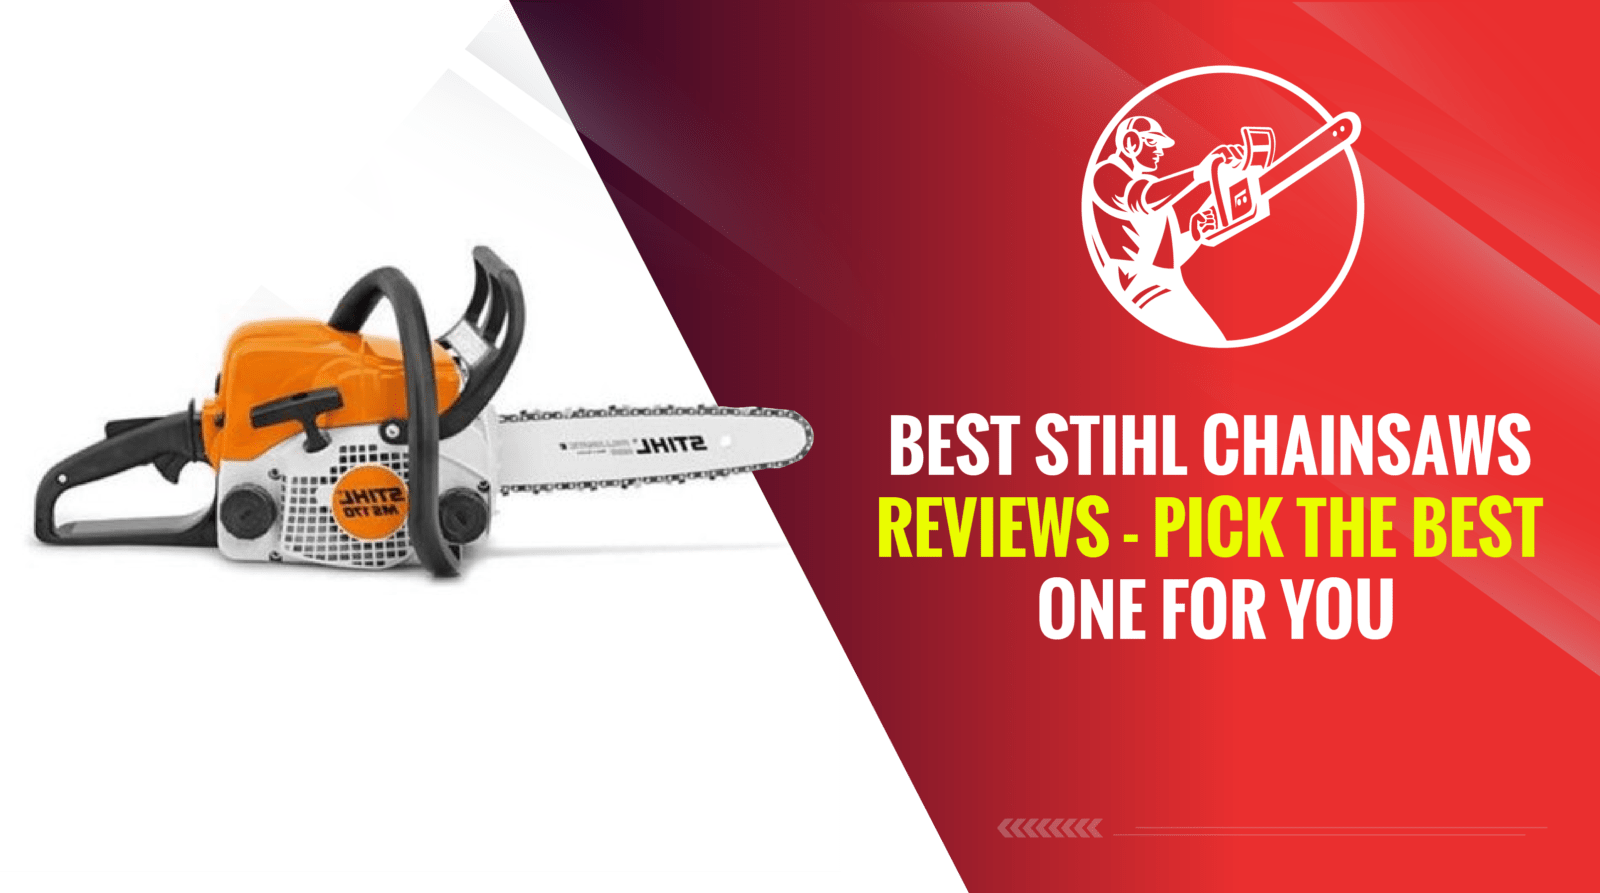 Best Stihl Chainsaws Reviews - Pick the Best One for you